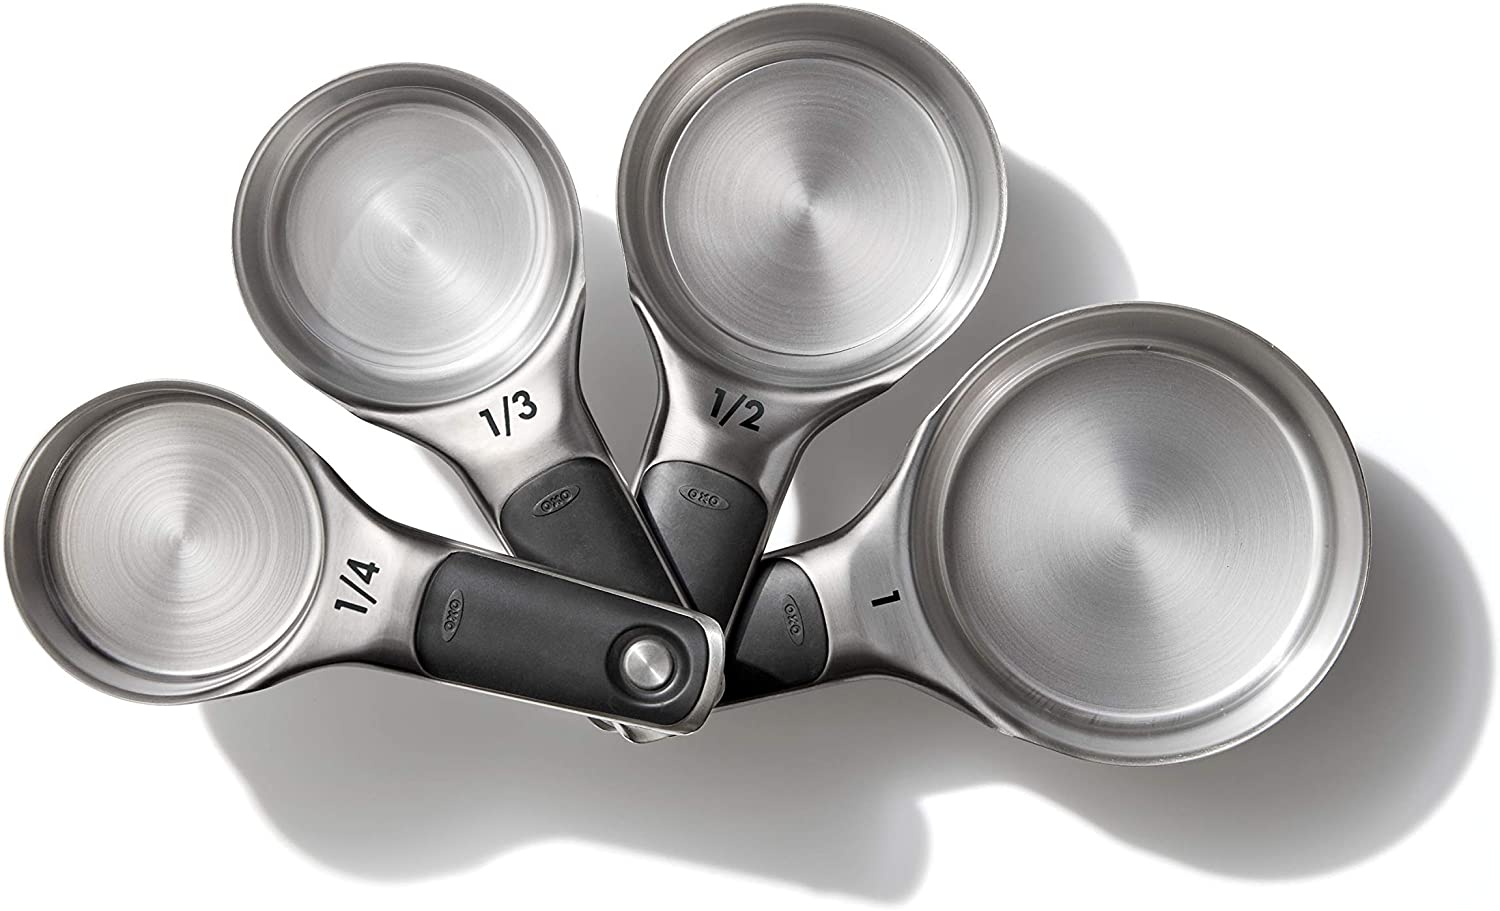 Stainless Steel Measuring Cups - The Clever Carrot